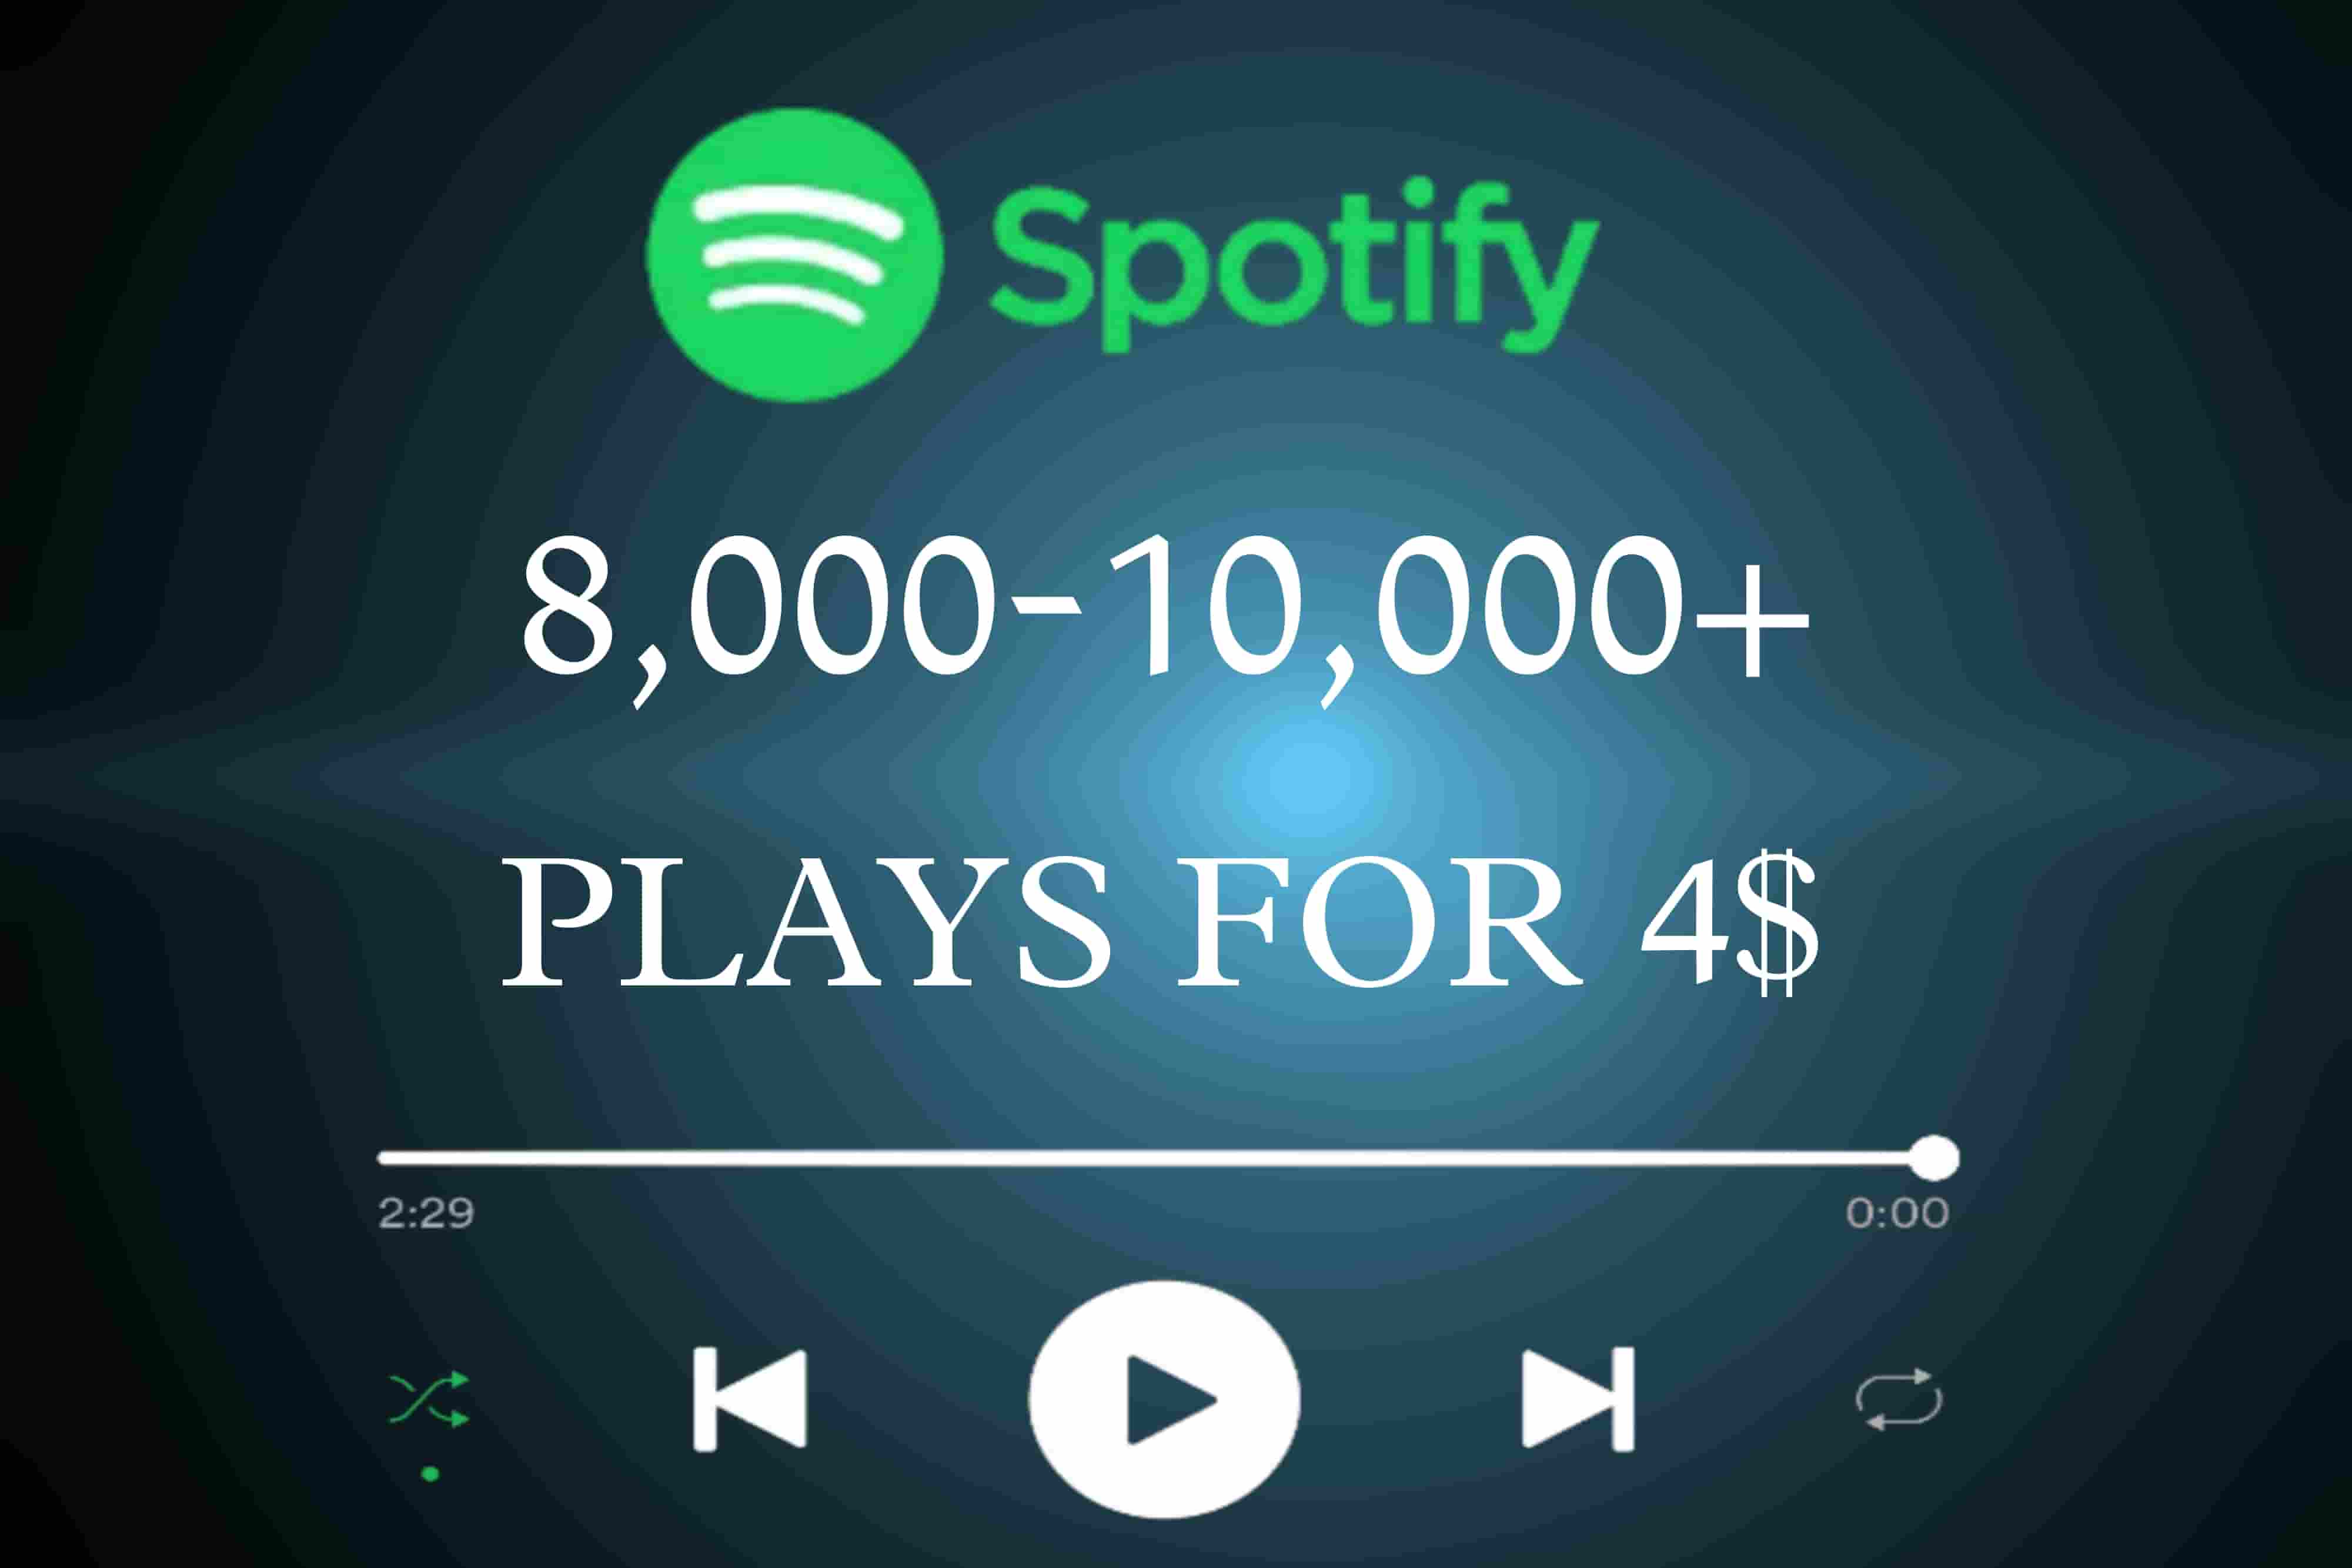 8,000-10,000+ SPOTIFY PLAYS LIFETIME GUARENTEE FOR 4$